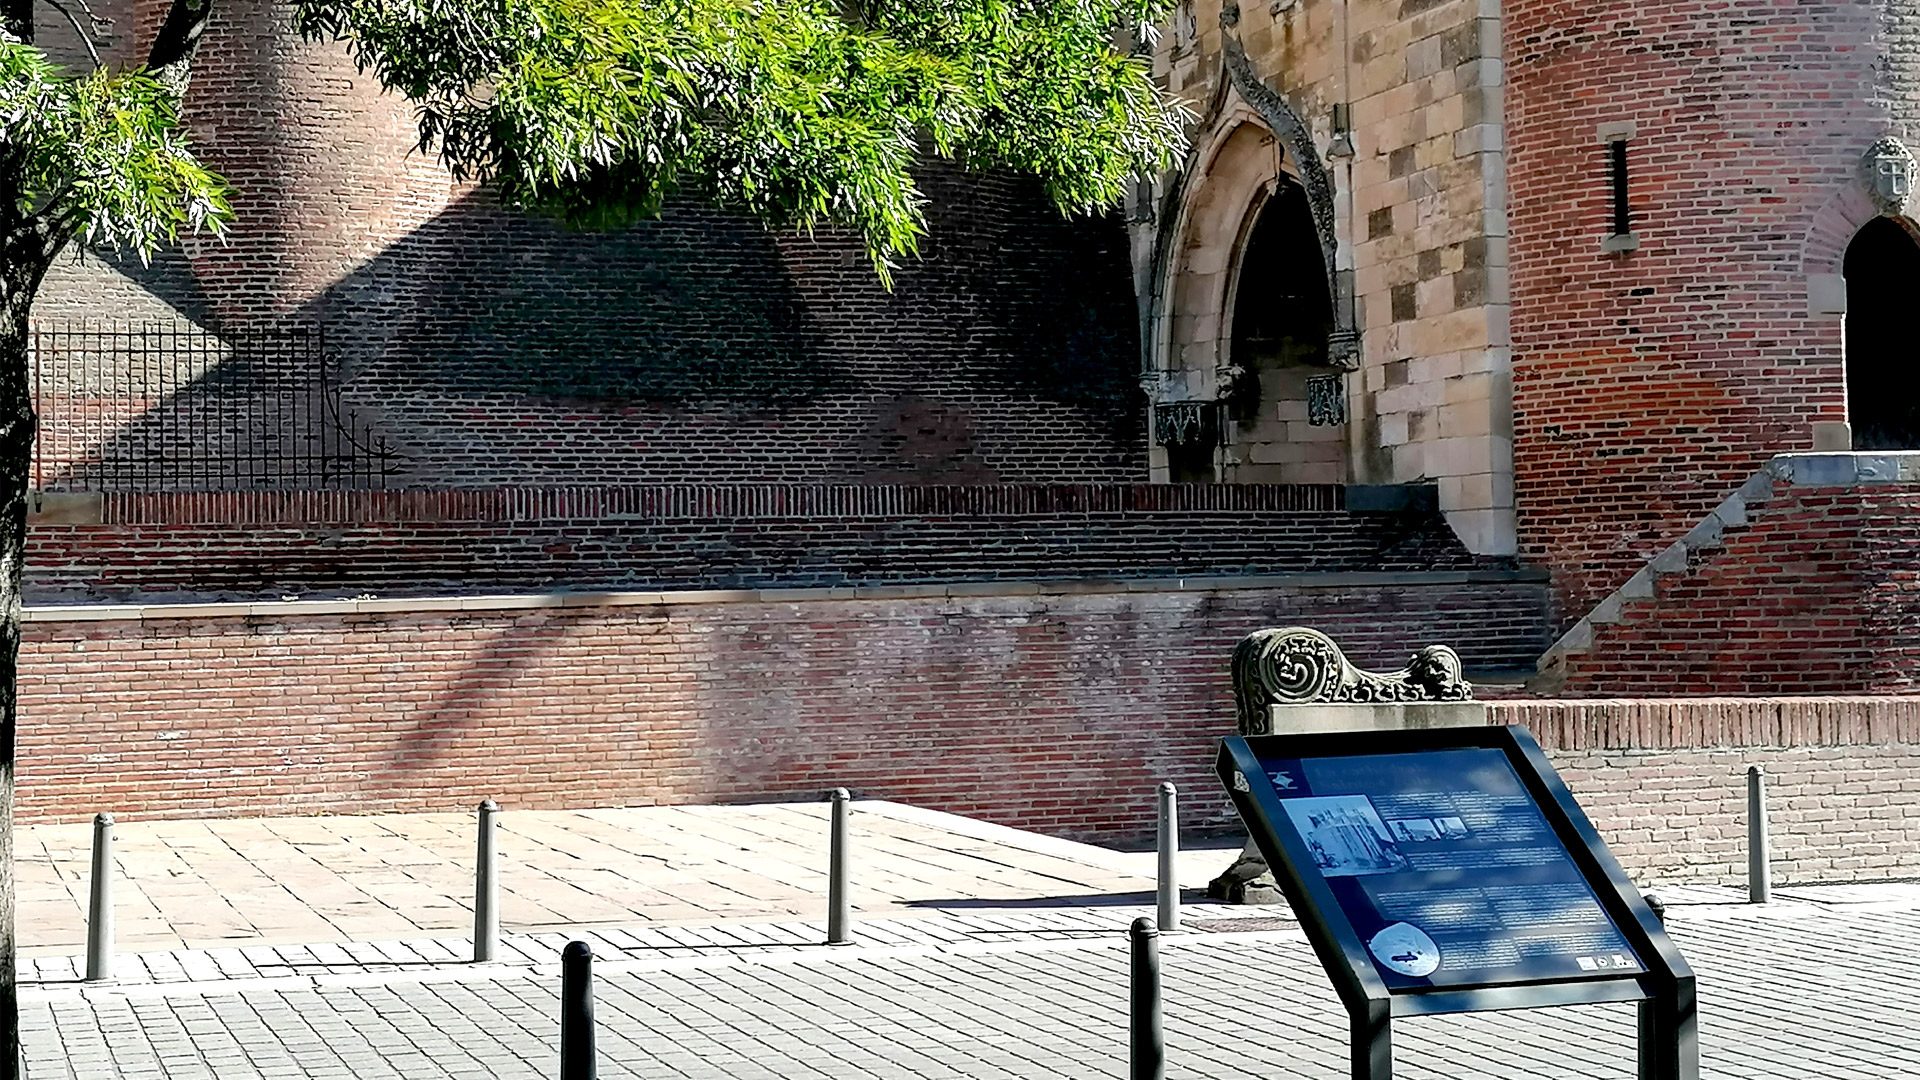 Circuits and discovery in the historic center of ALbi - a good idea for a visit